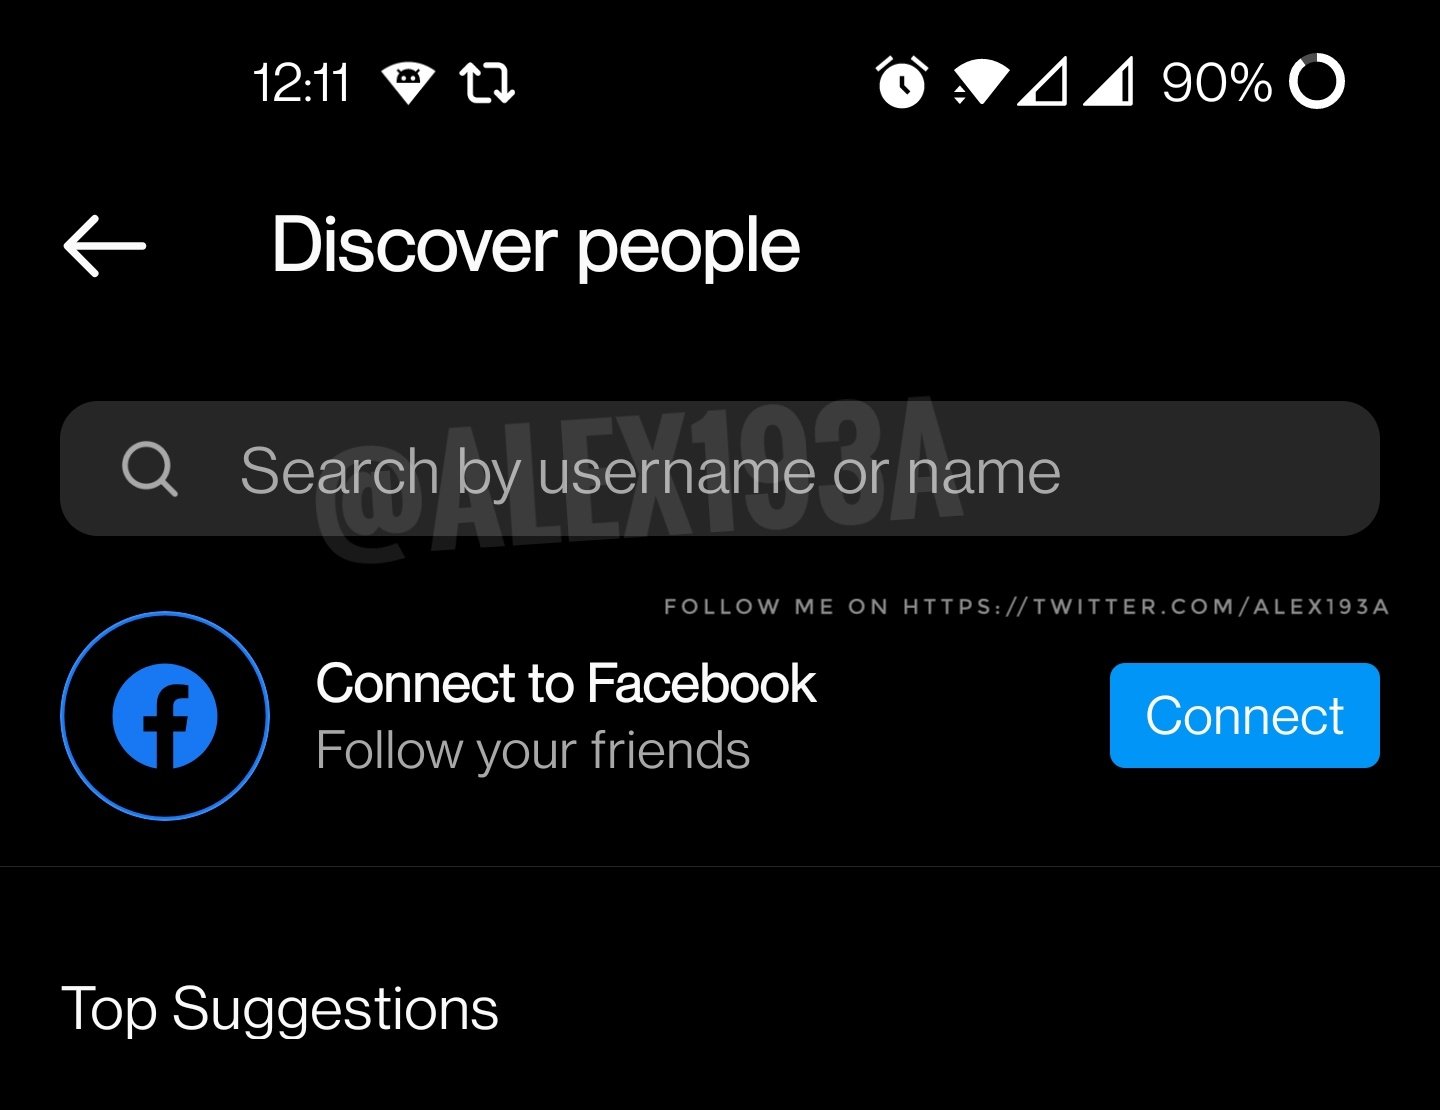 Instagram is working on the ability to search for people by username or name in the Discovery People page